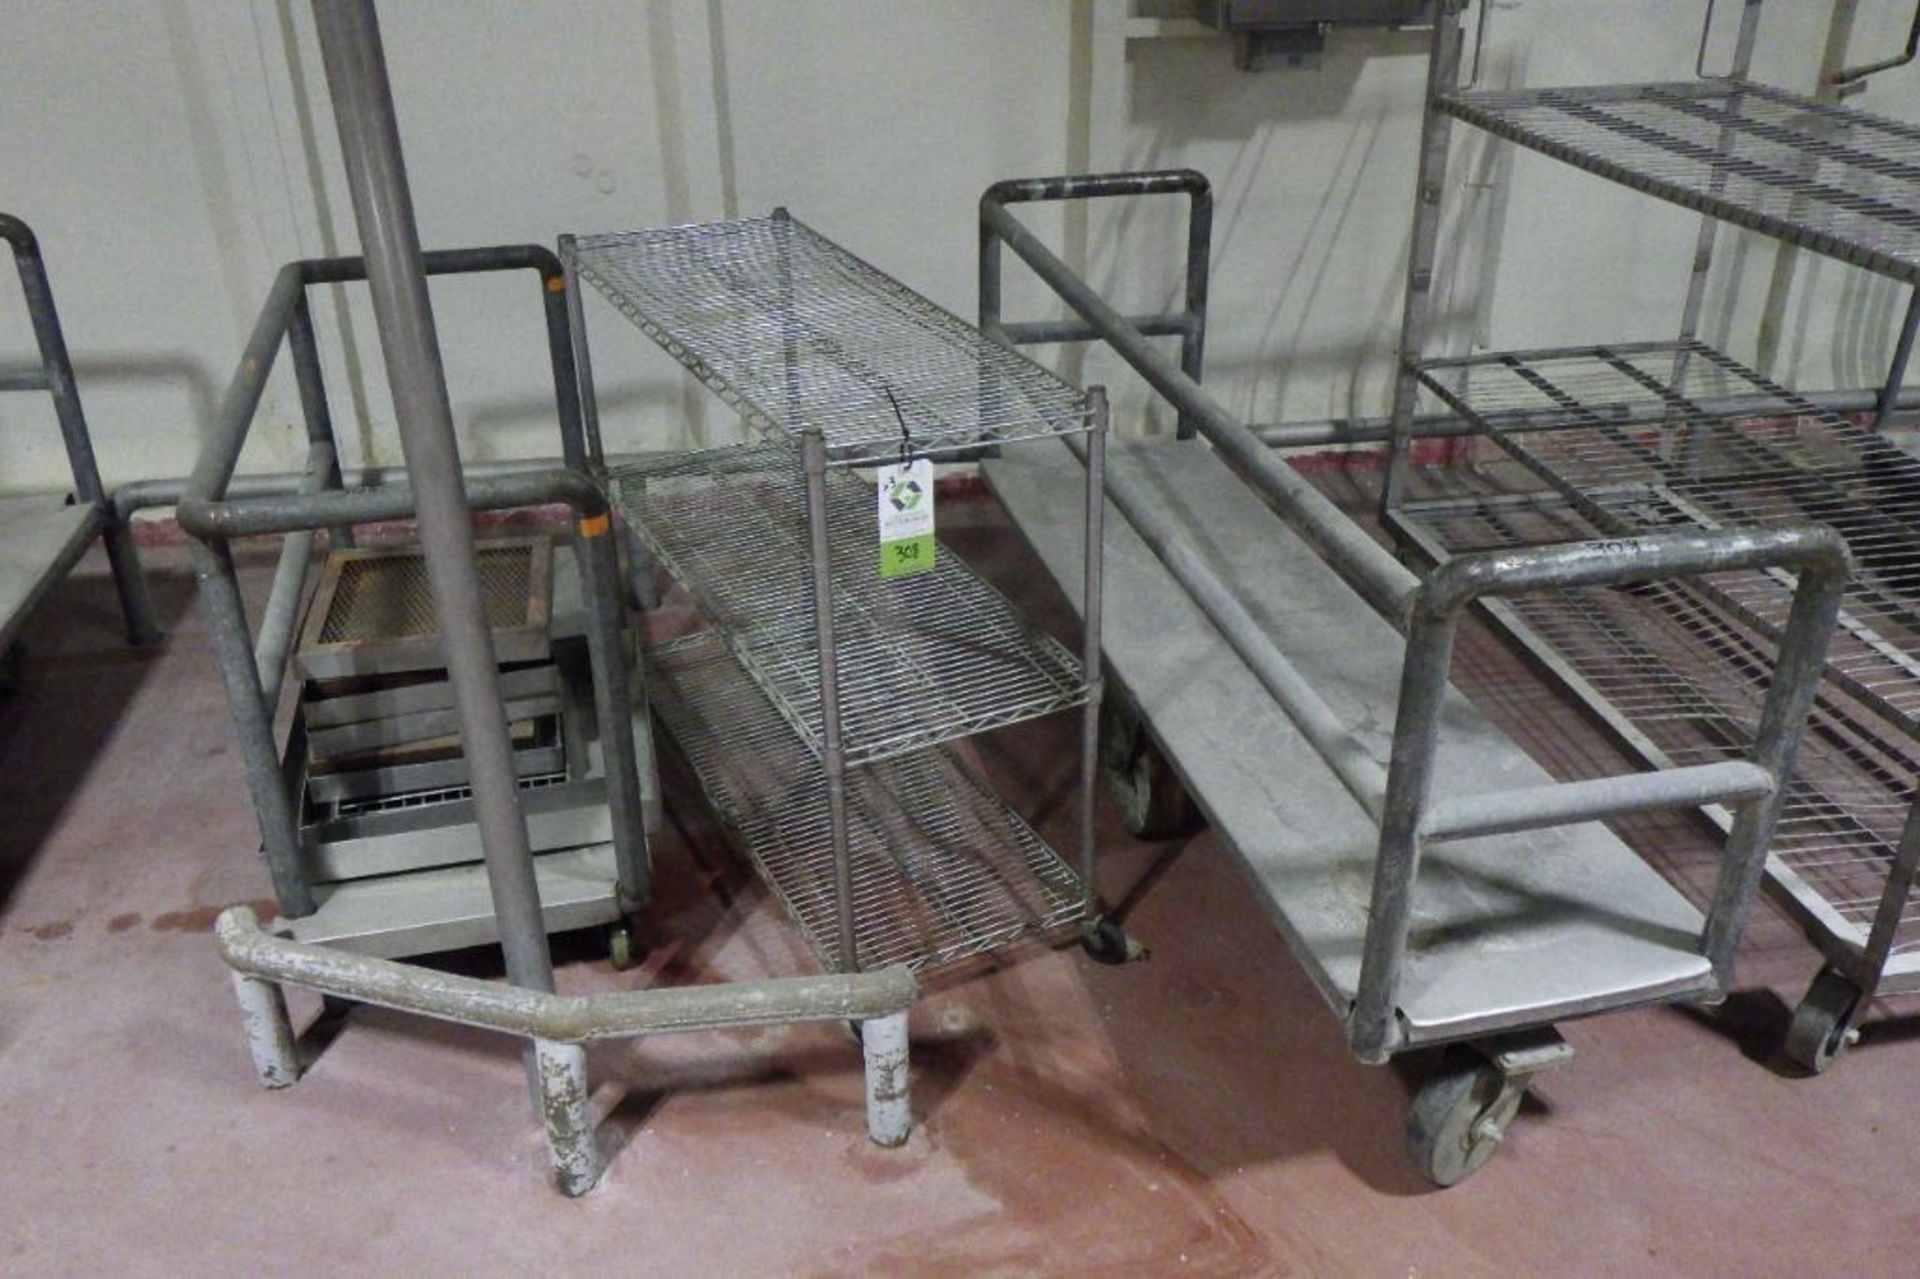 (3) assorted racks and carts